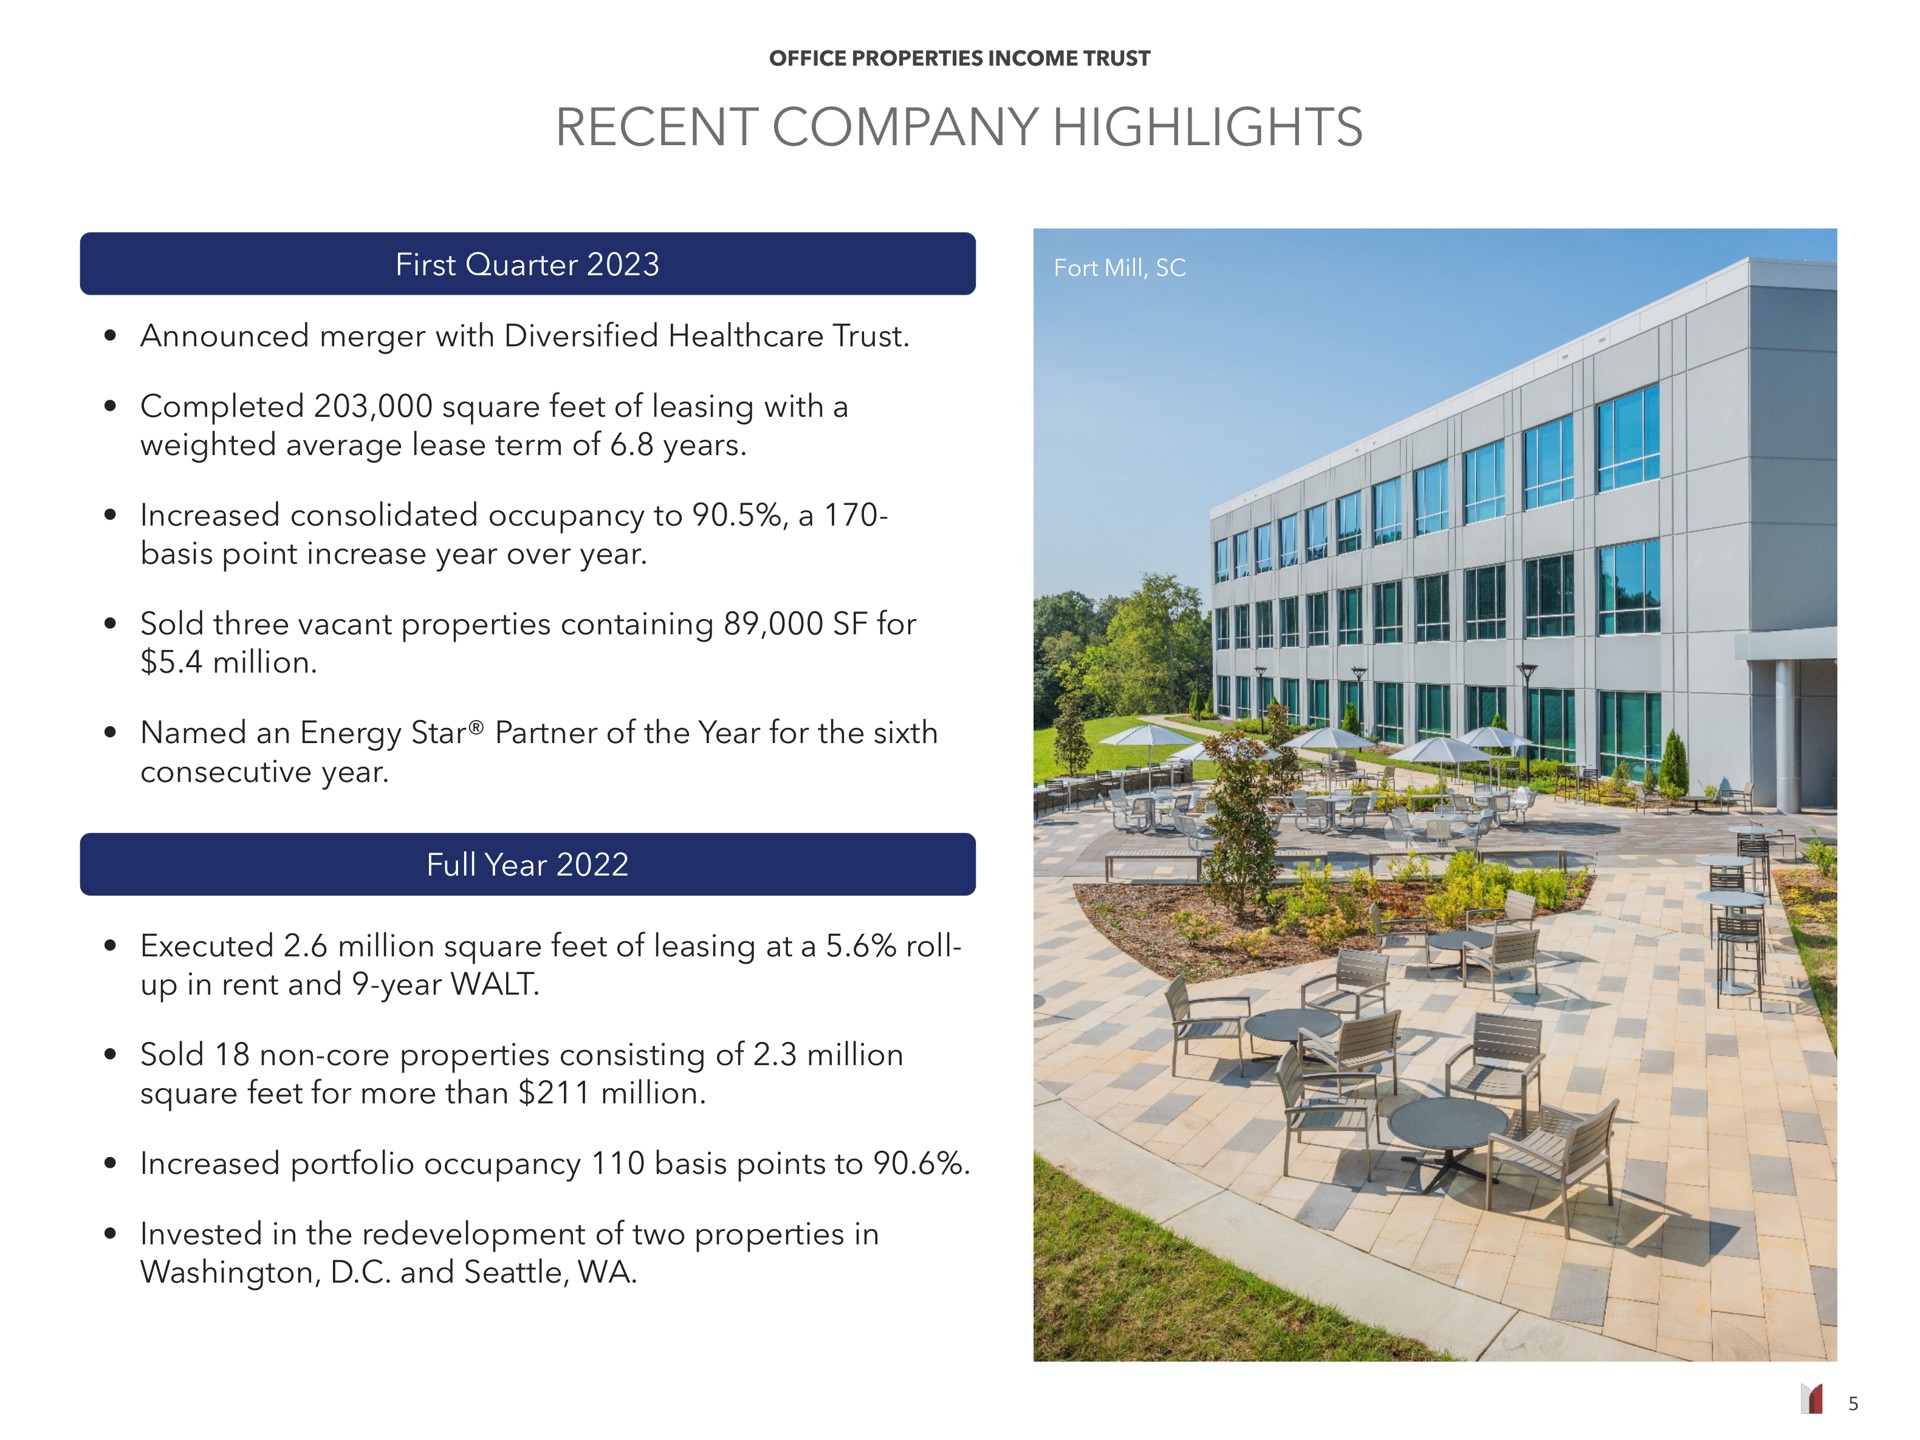 recent company highlights | Office Properties Income Trust